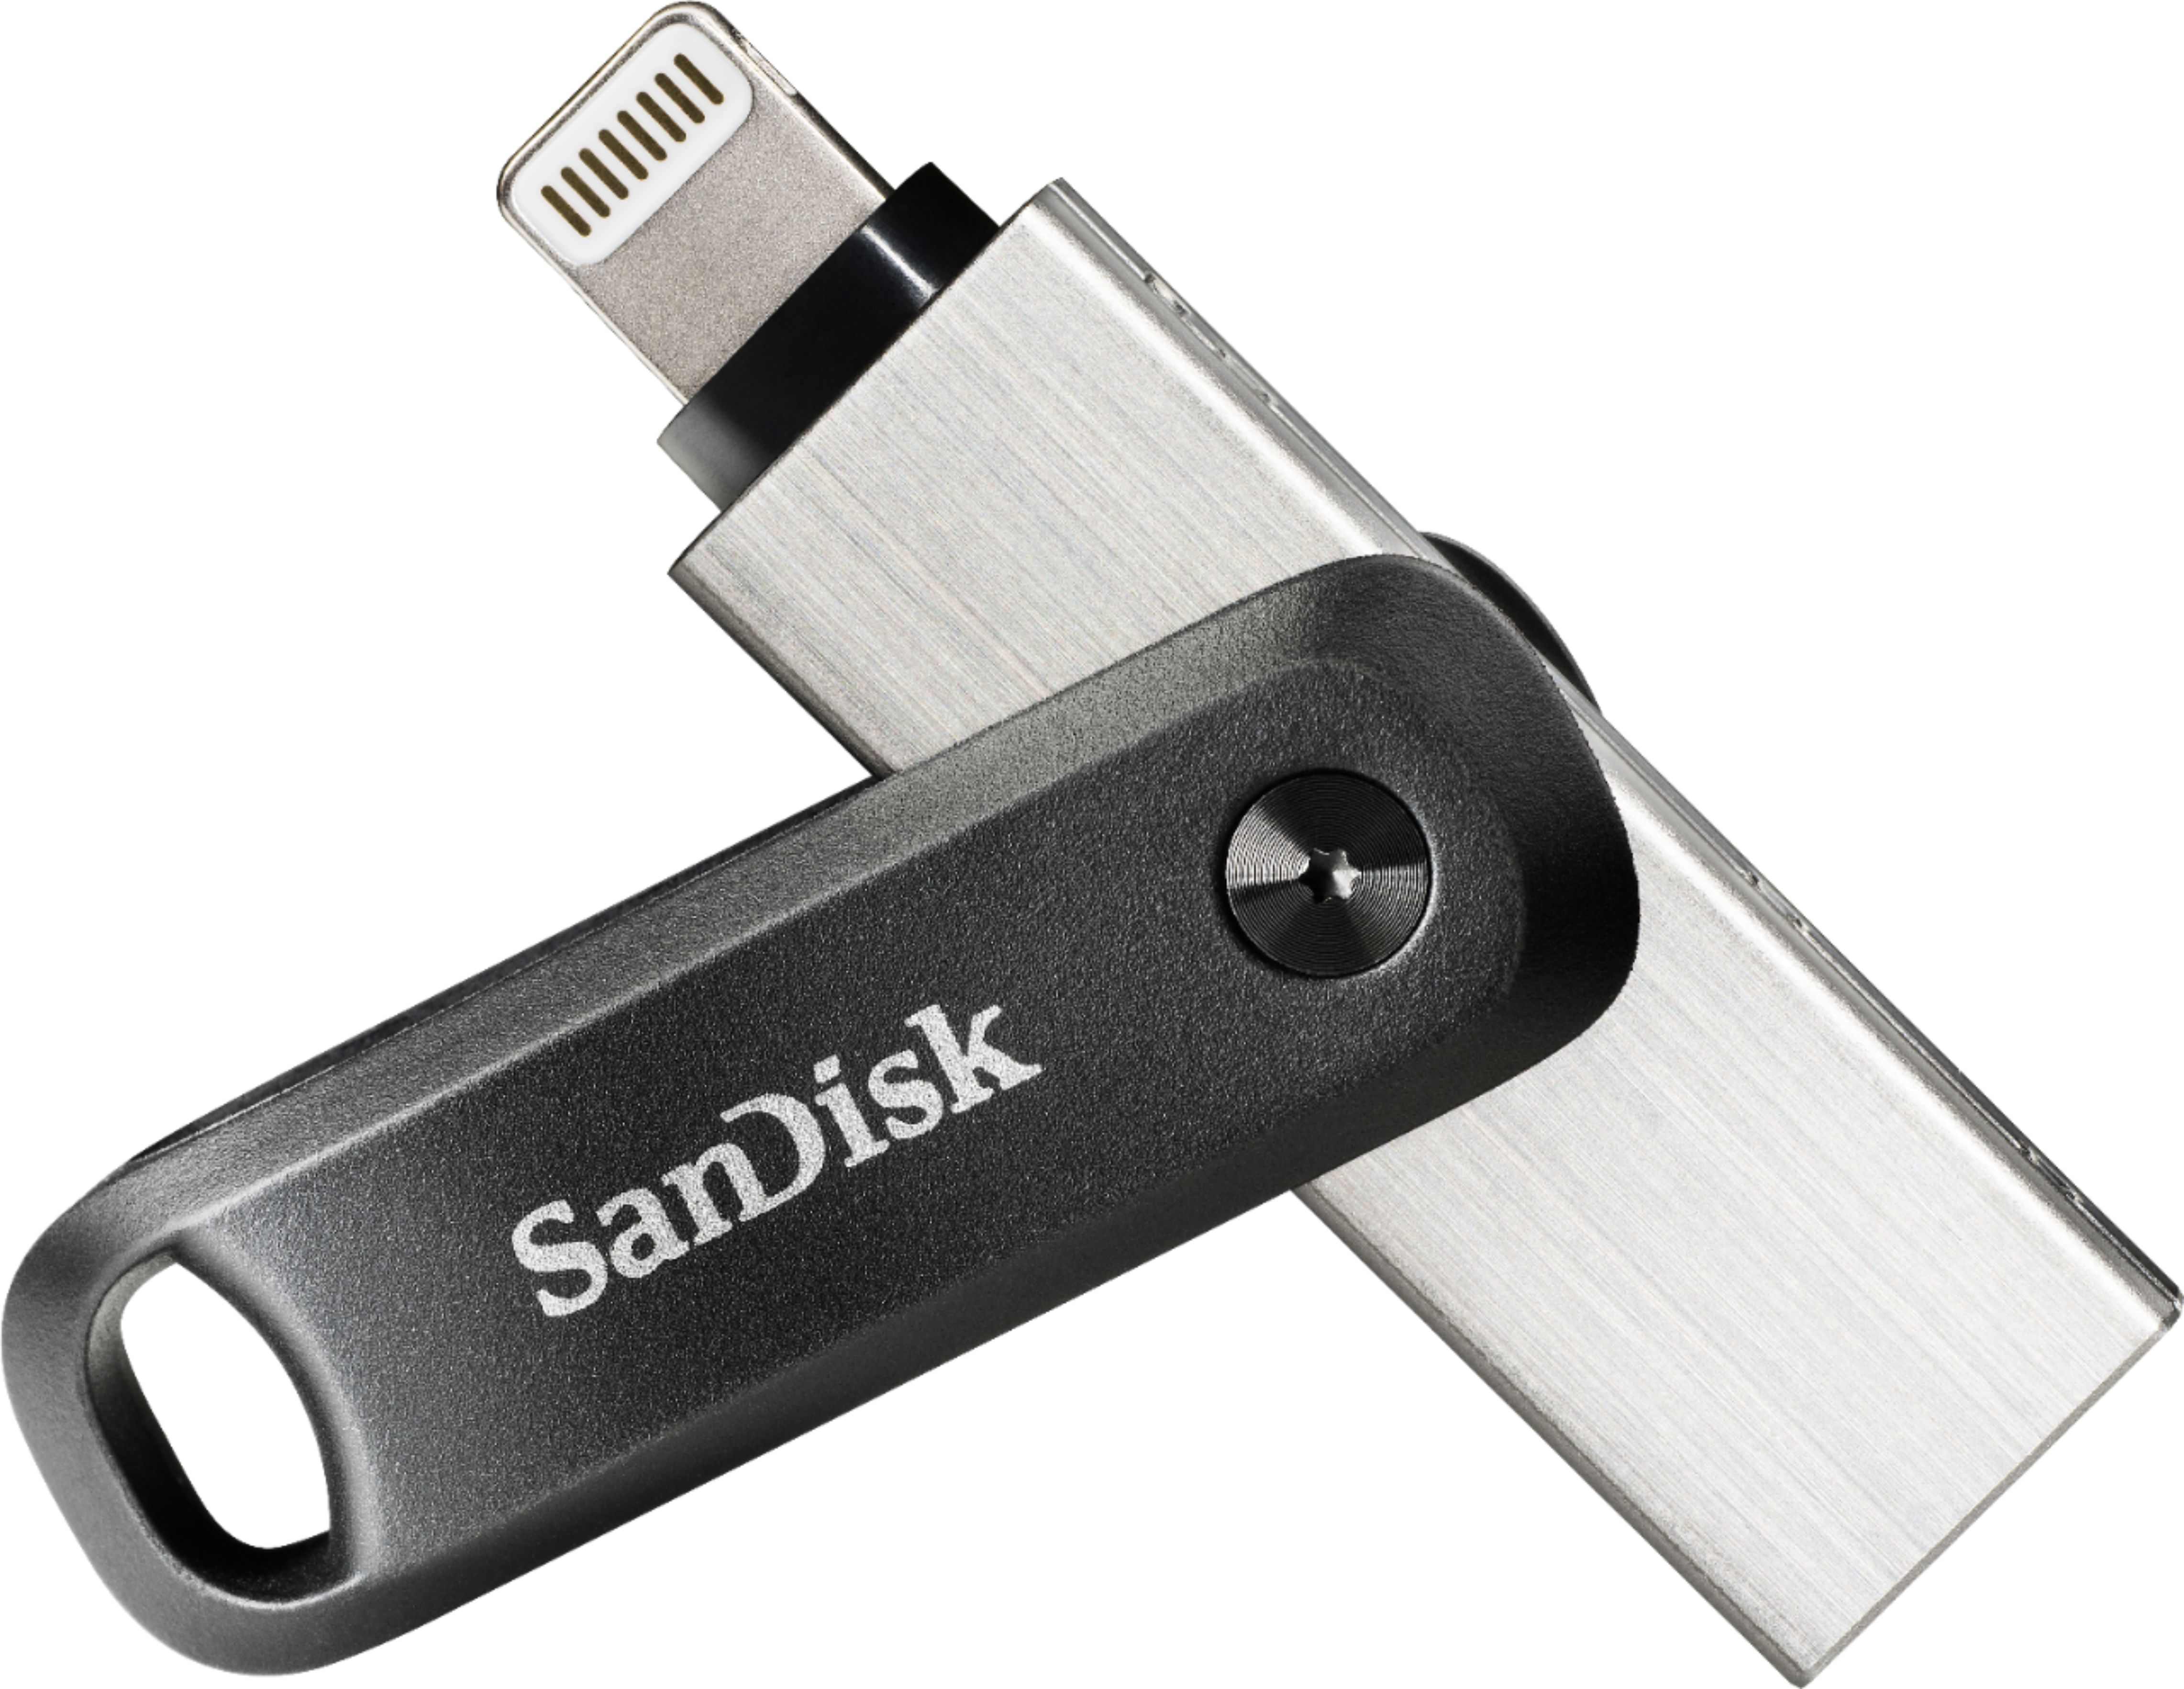 SanDisk iXpand Flash Drive Go 256GB USB 3.0 Type-A to Apple Lightning for & iPad Black / Silver SDIX60N-256G-AN6NE - Best Buy